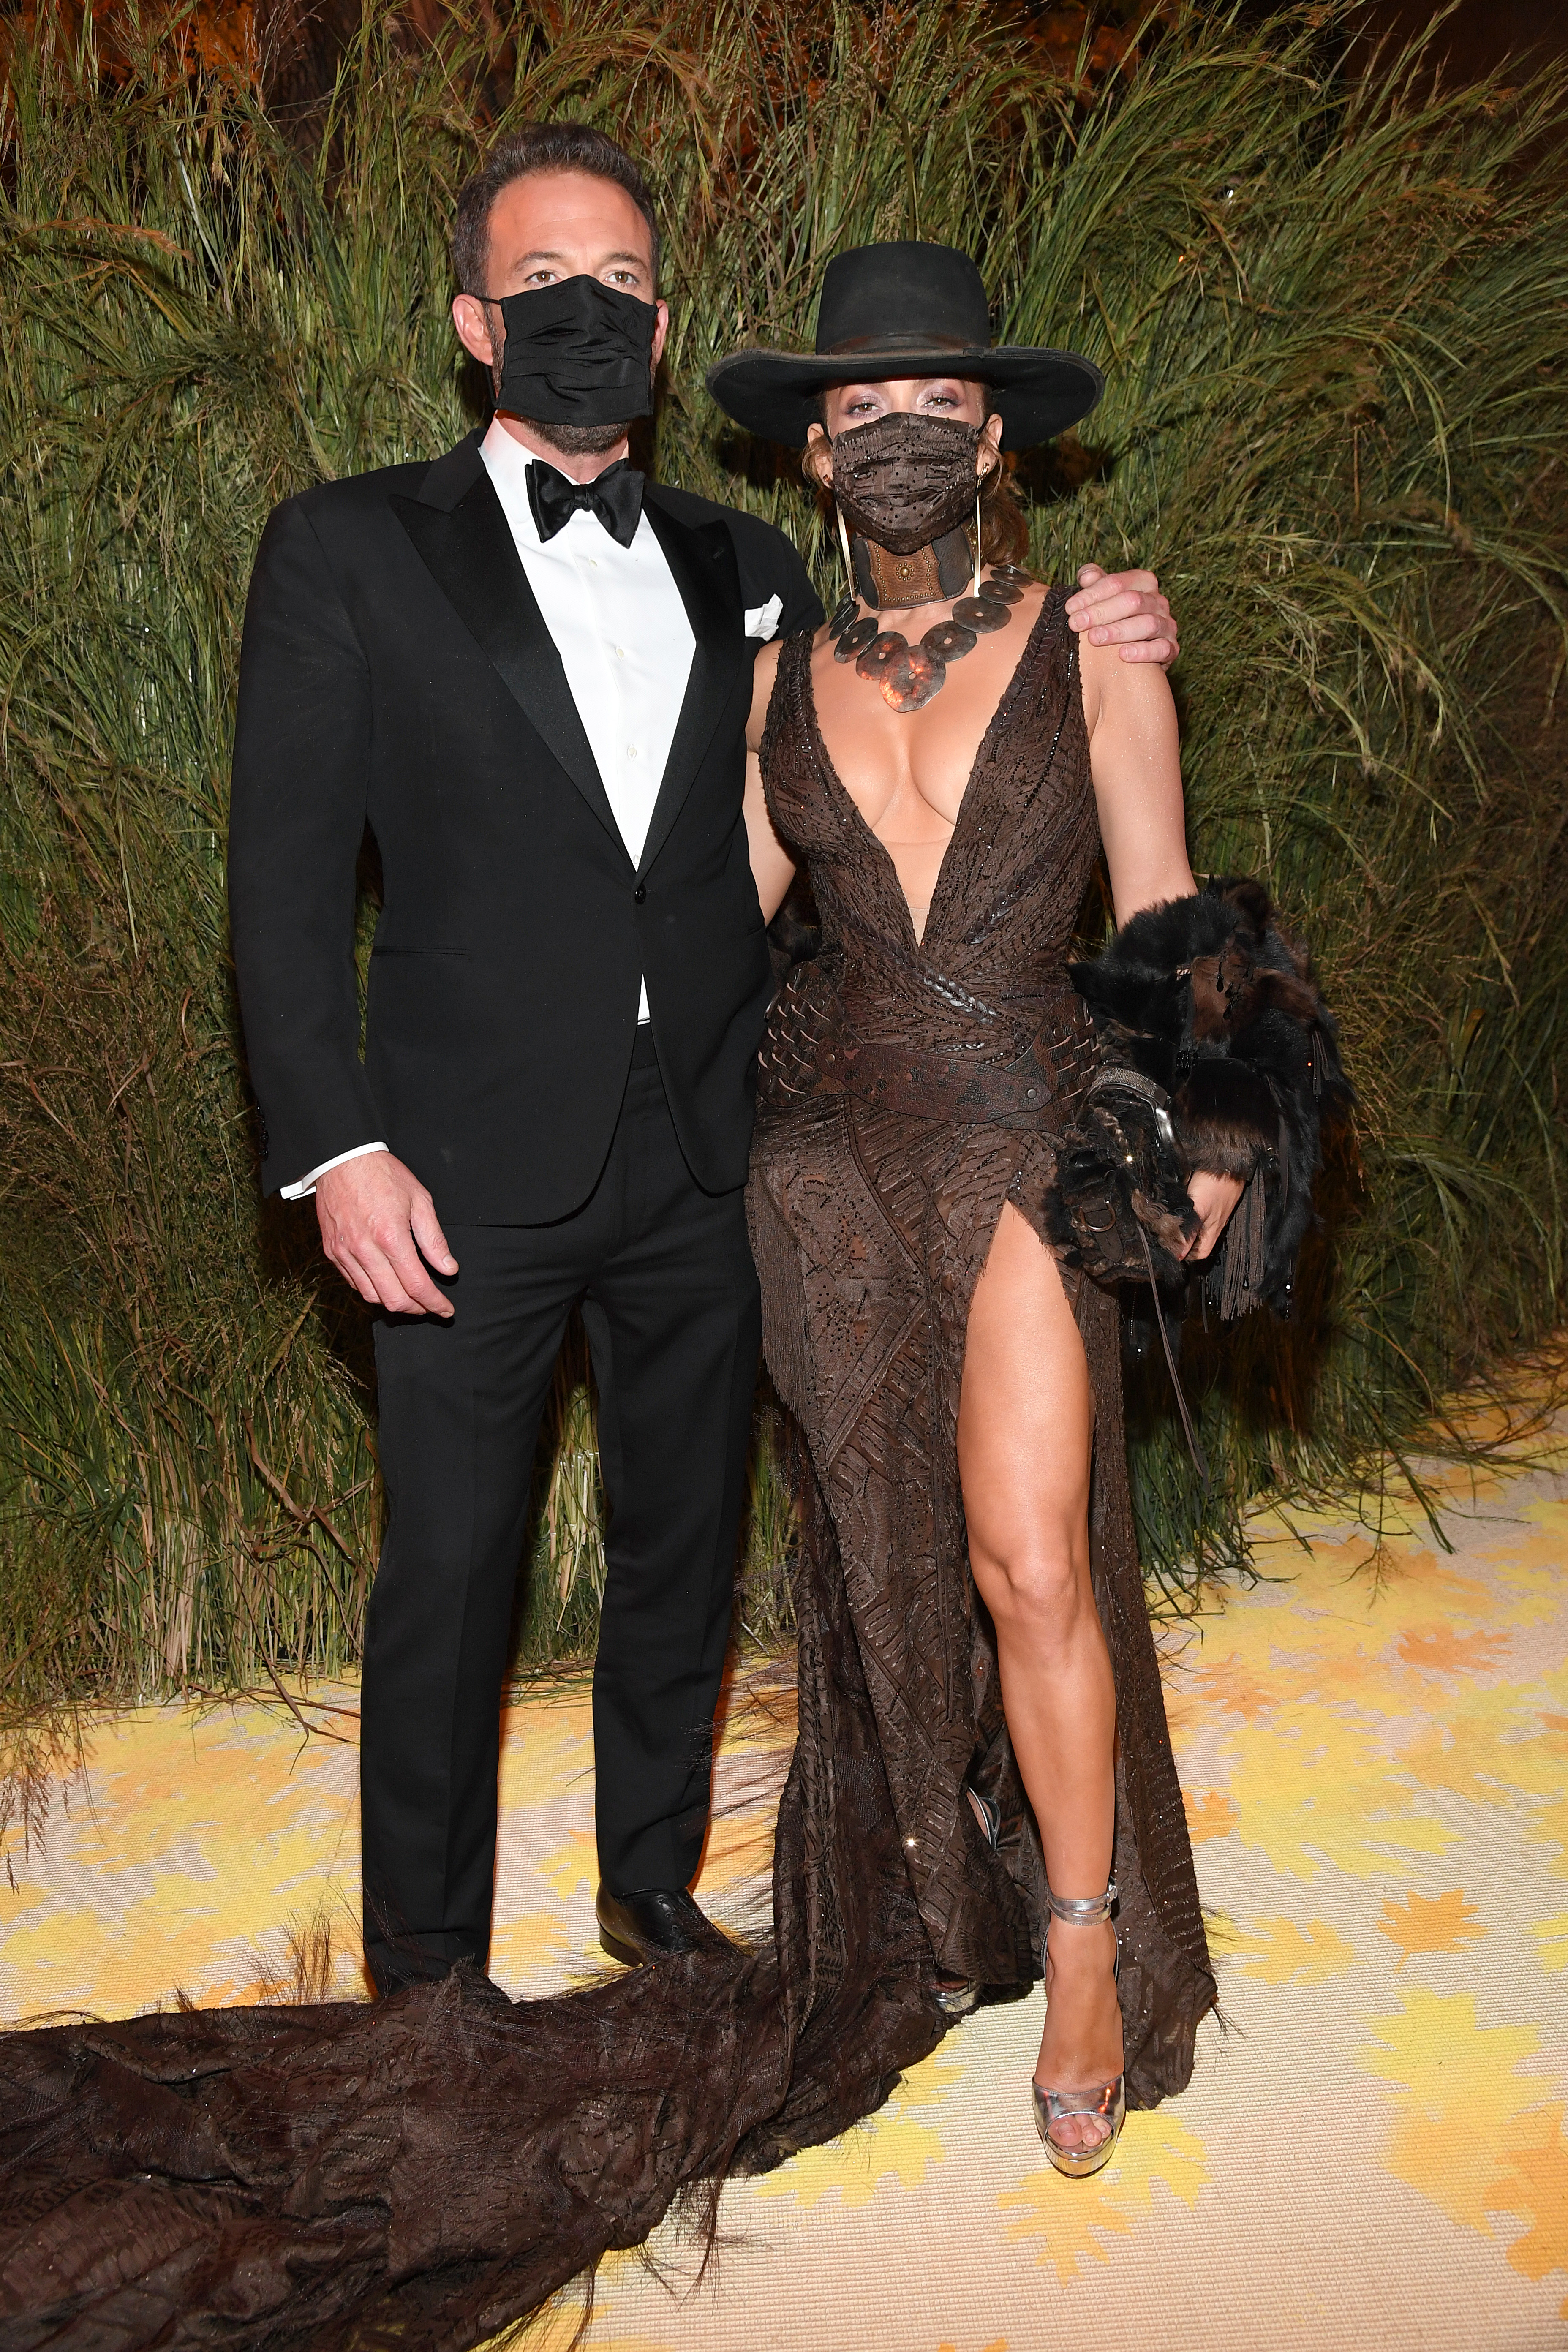 Ben Affleck and Jennifer Lopez at the 2021 Met Gala Celebrating In America: A Lexicon Of Fashion in New York City on September 13, 2021 | Source: Getty Images